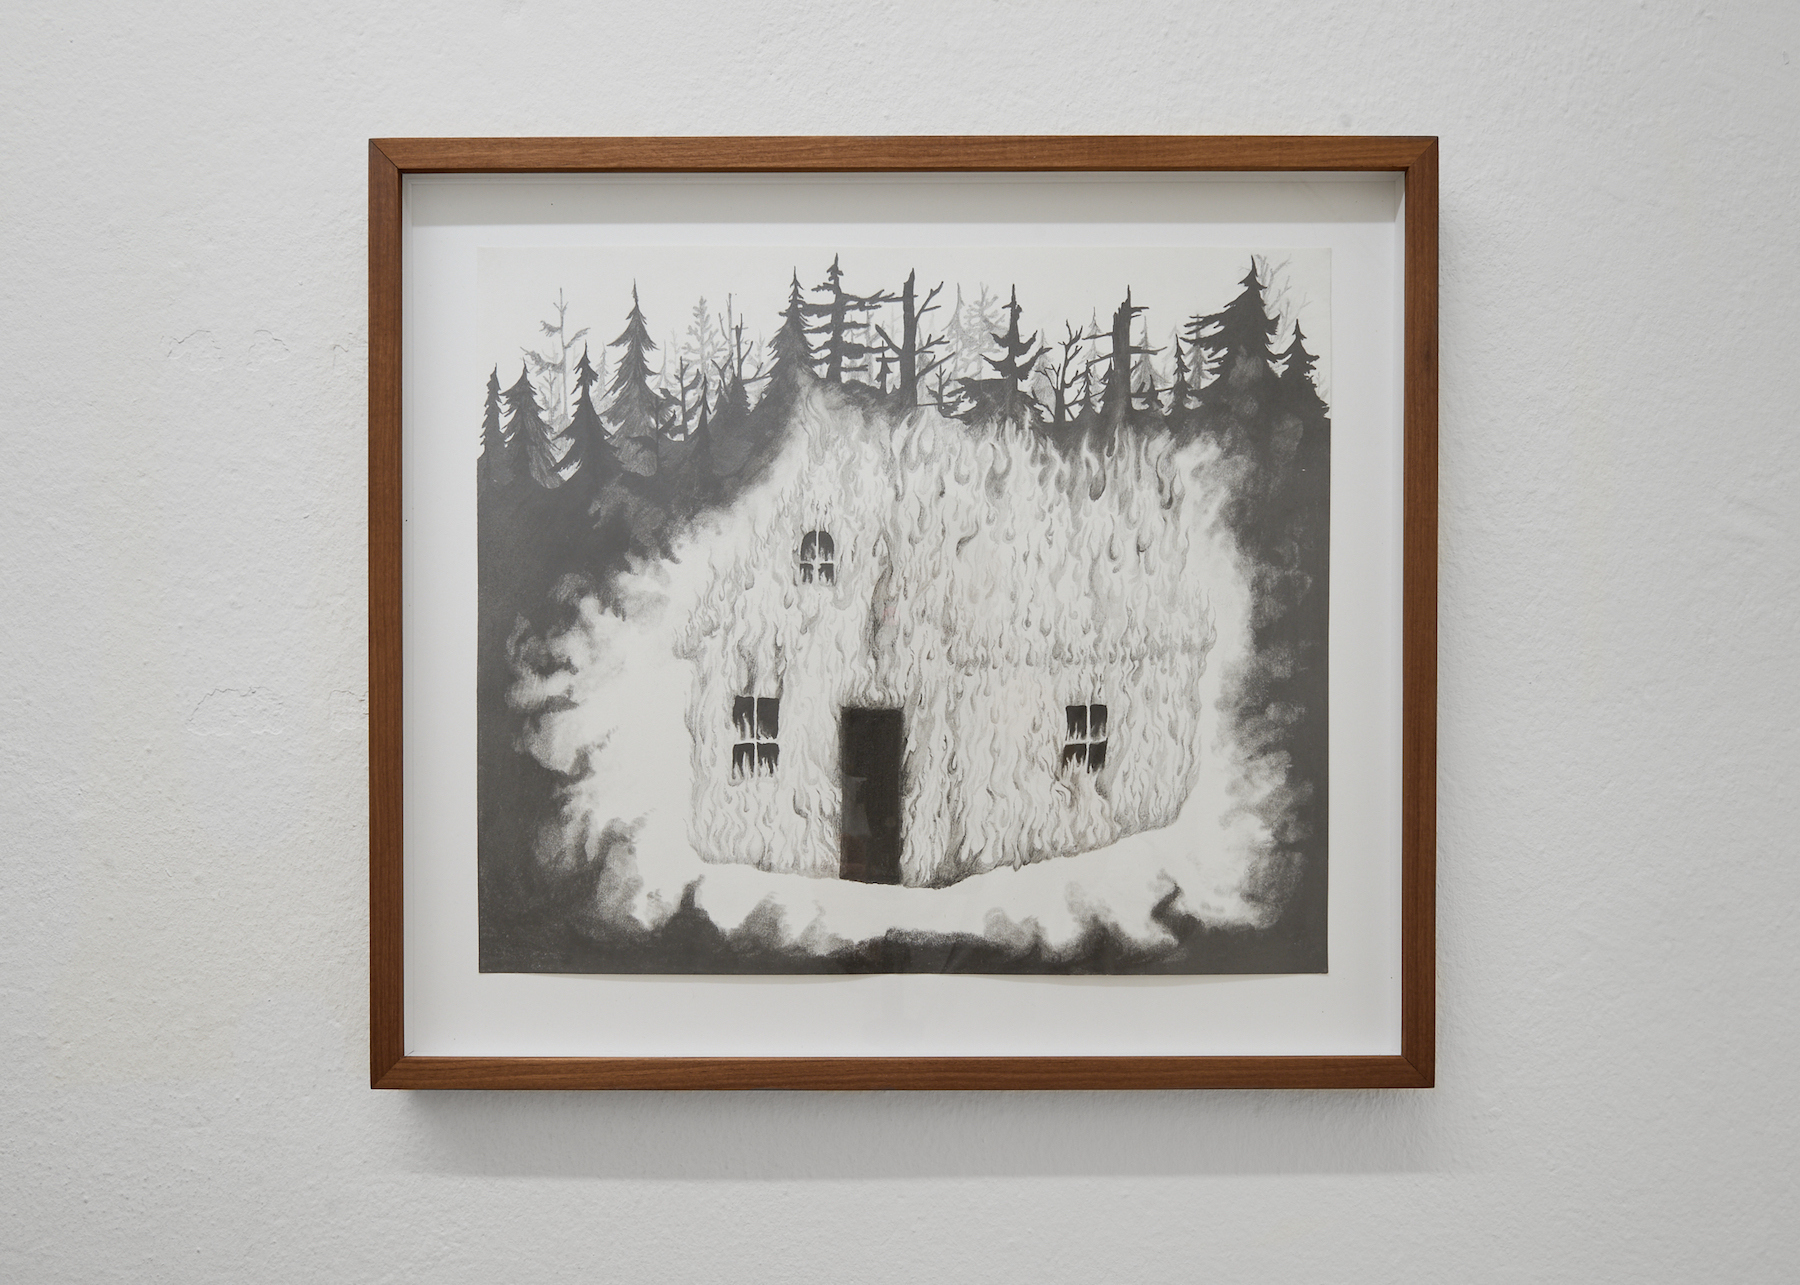 Alex Turgeon, A Flaming Cabin in the Woods , 2020, Graphite on paper, 44,5 x 51,8 cm